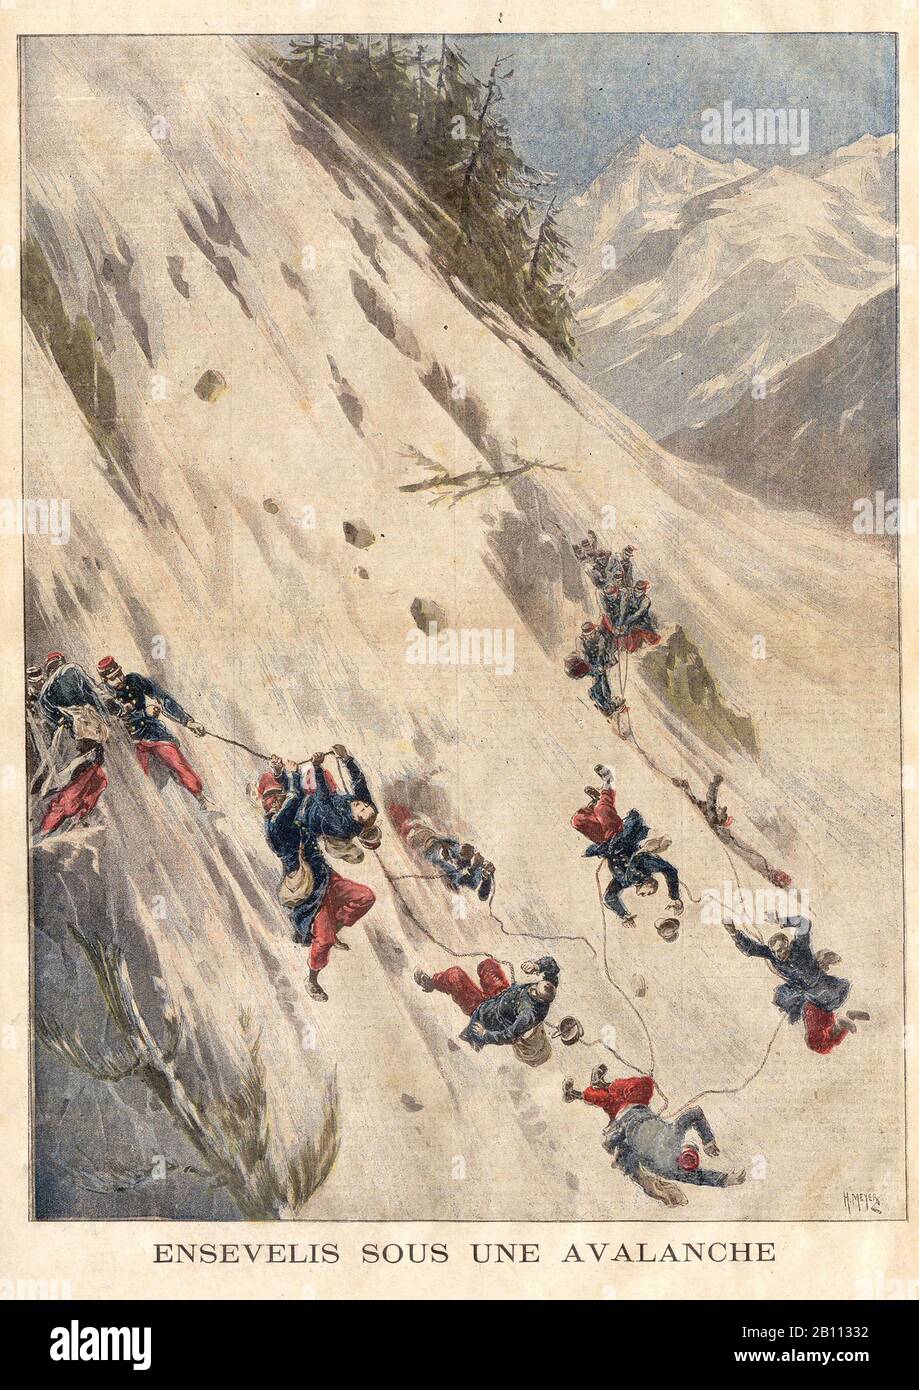 ENSEVELIS SOUS UNE AVALANCHE - ENSEVELIS UNDER AN AVALANCHE - In 'Le Petit Journal' French Illustrated newspaper - Stock Photo